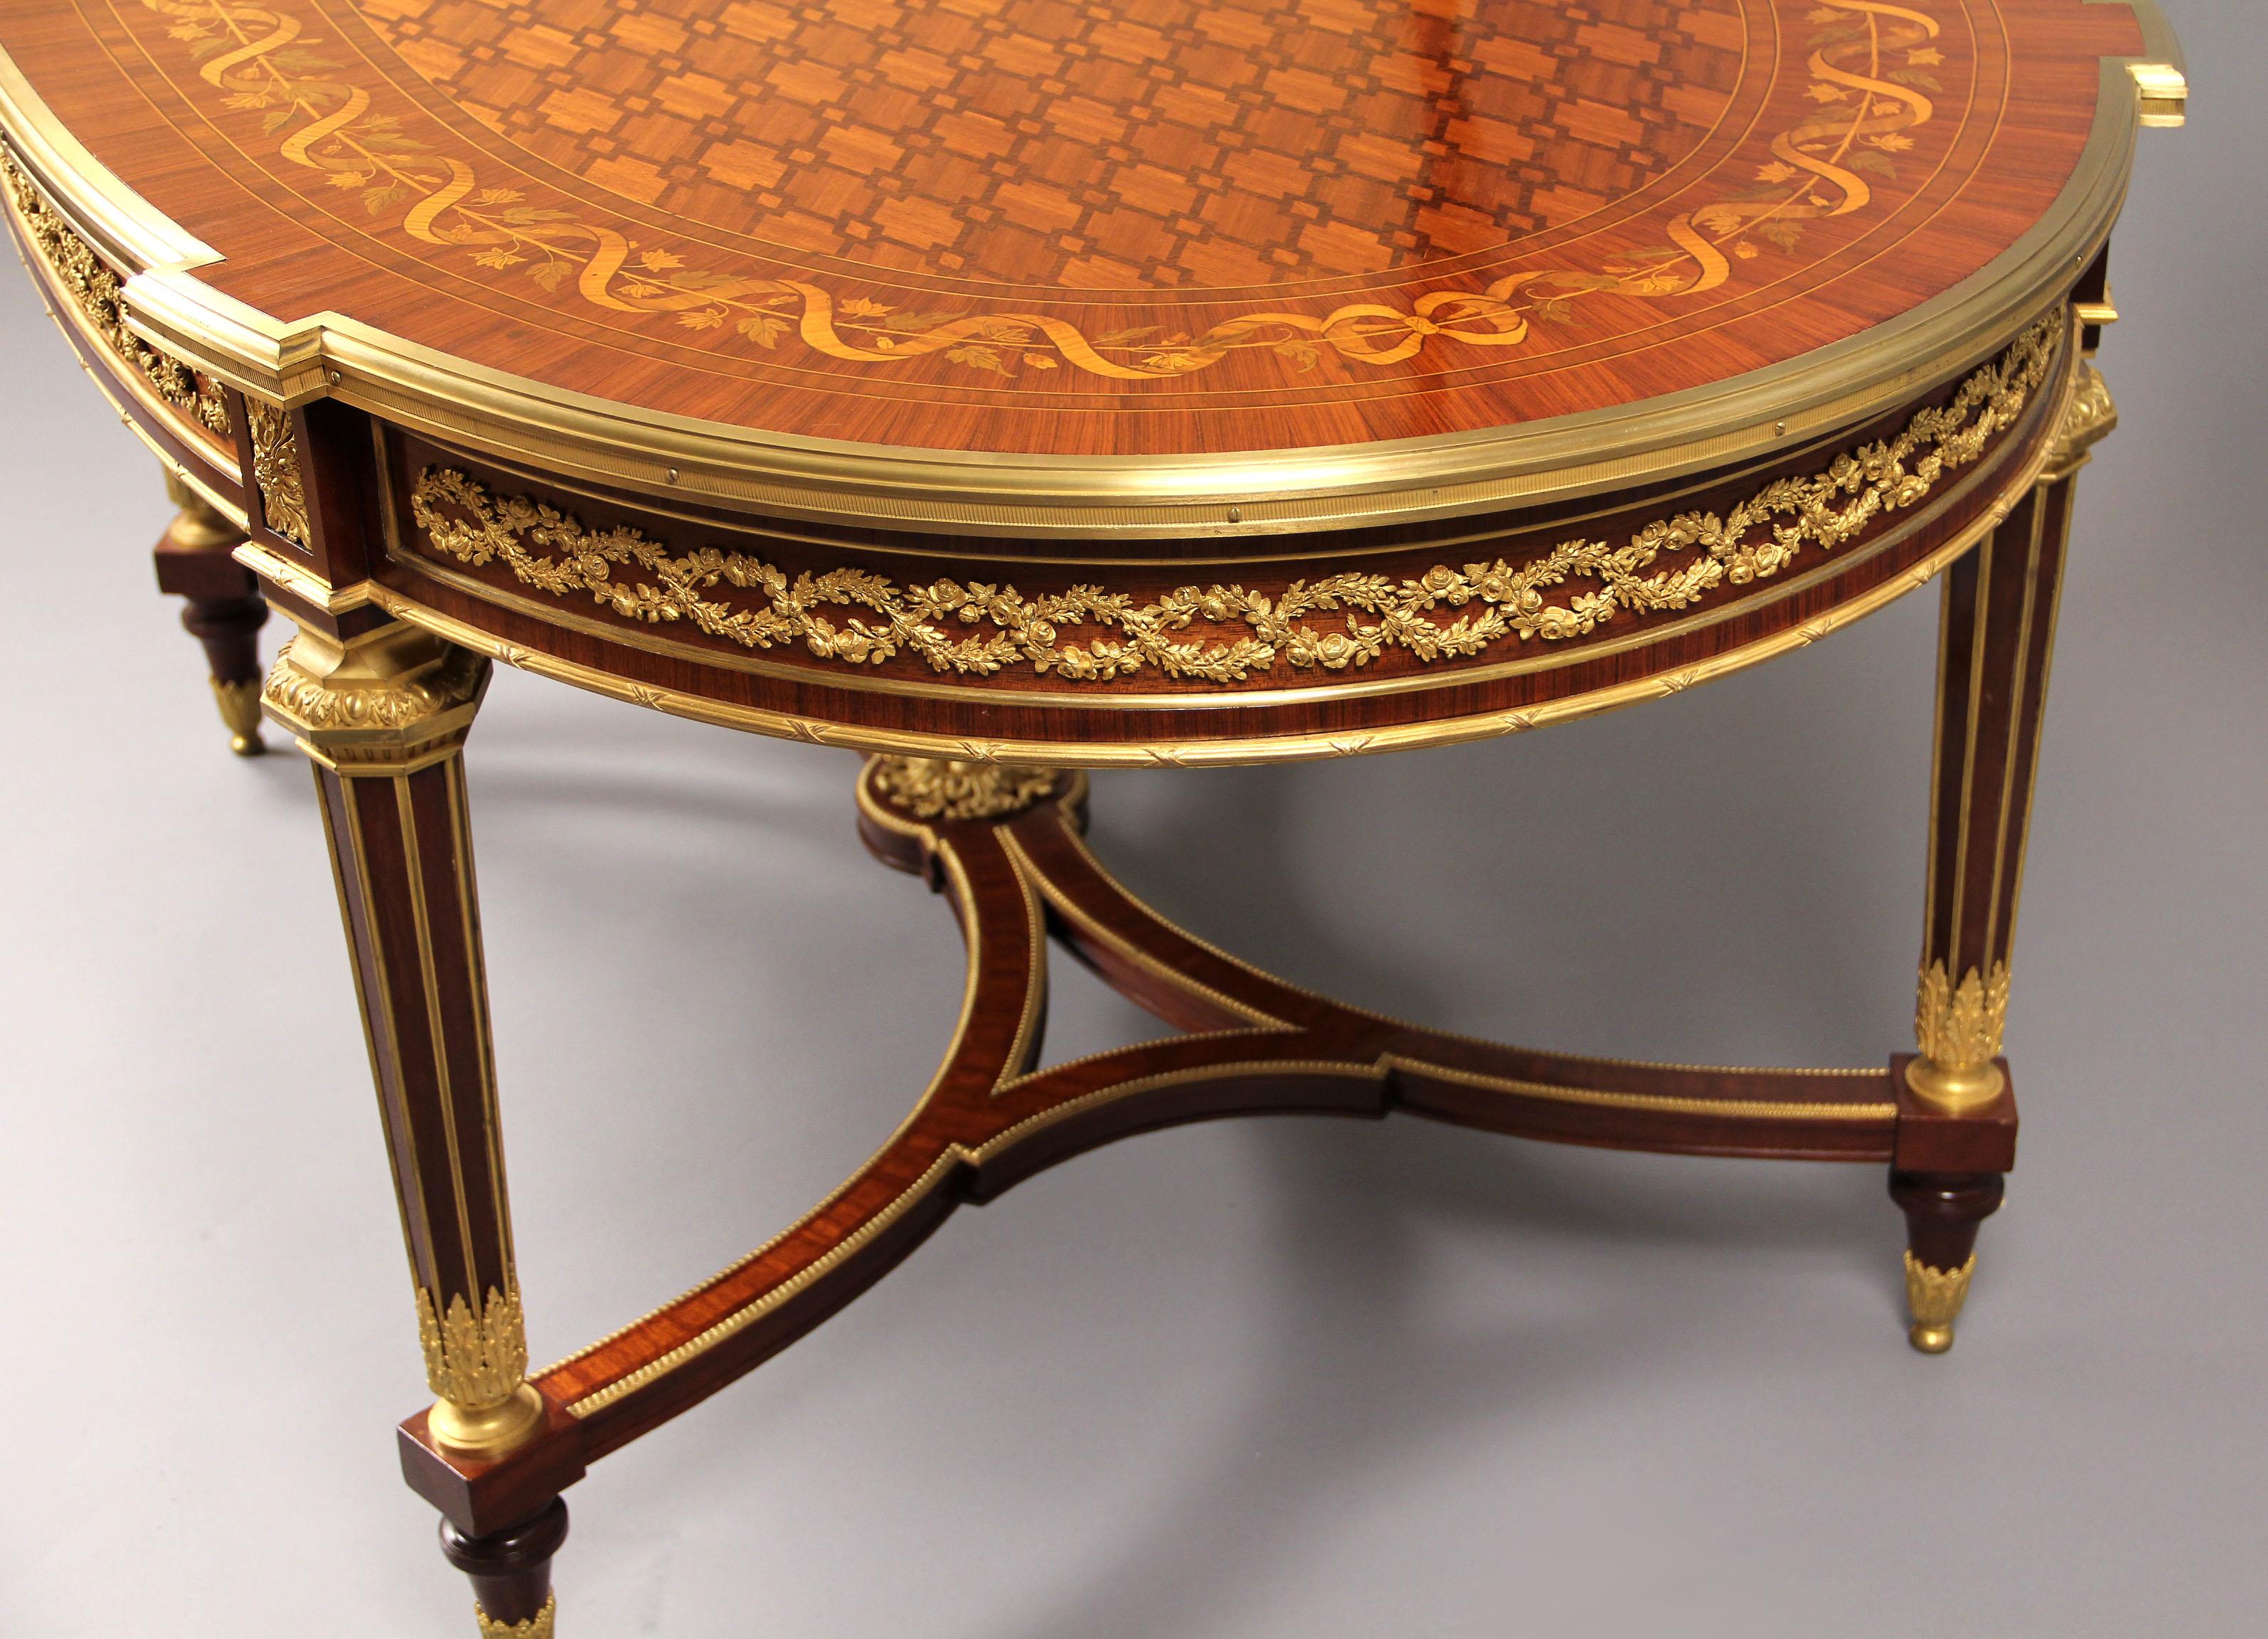 Parquetry Rare Late 19th Century Inlaid Marquetry Center Table by François Linke For Sale